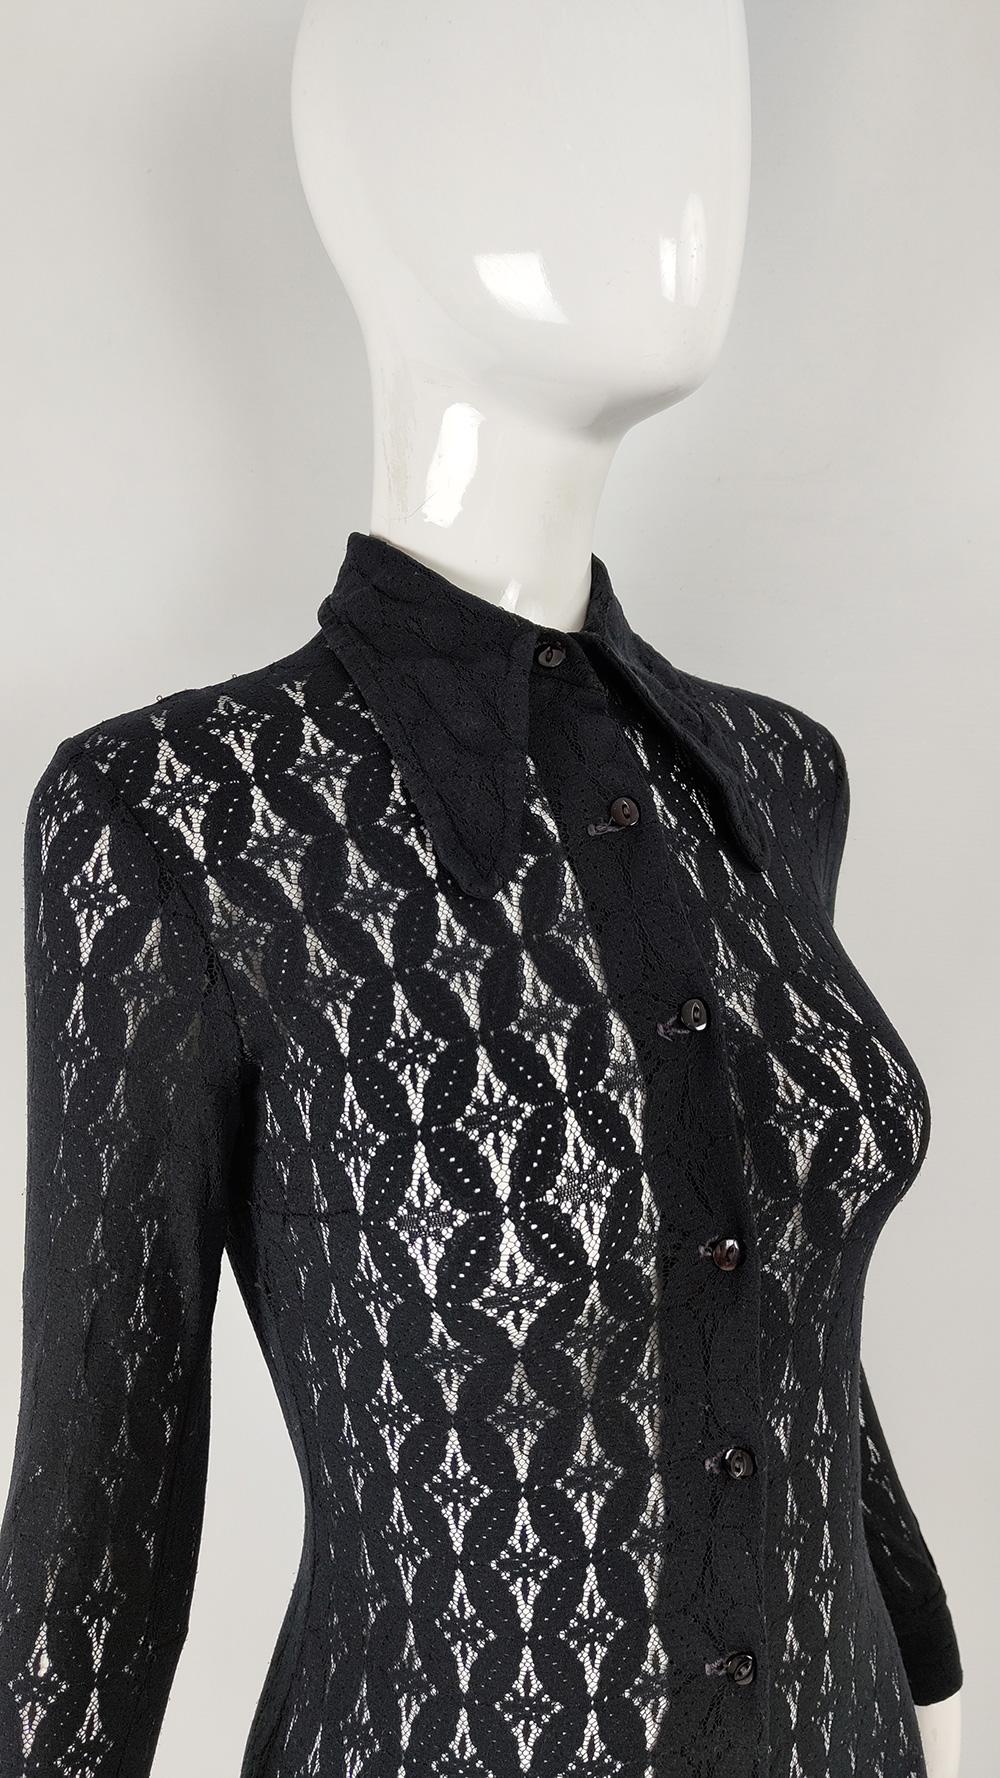 Women's Vintage 60s 70s Black Lace Sheer See Through Long Sleeve Jumpsuit, 1960s 1970s